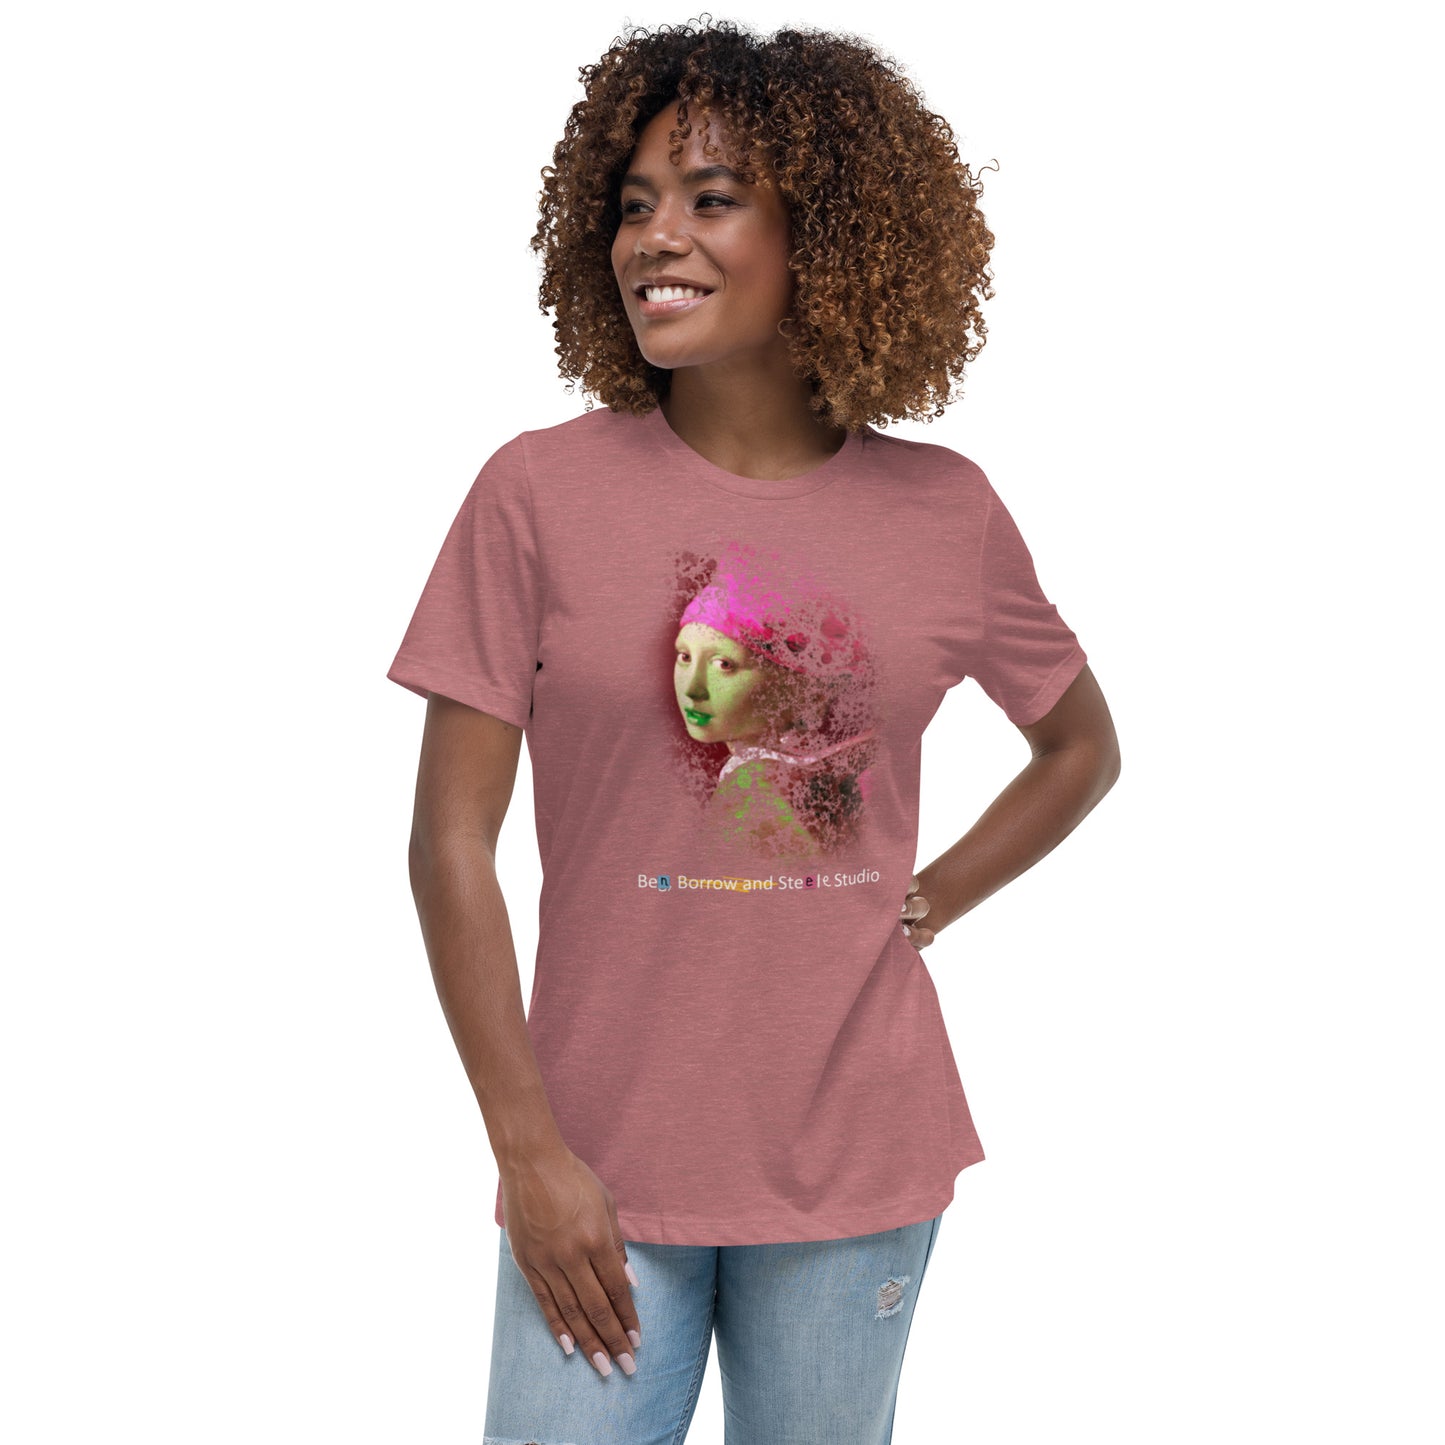 Lost Girl Women's Relaxed T-Shirt